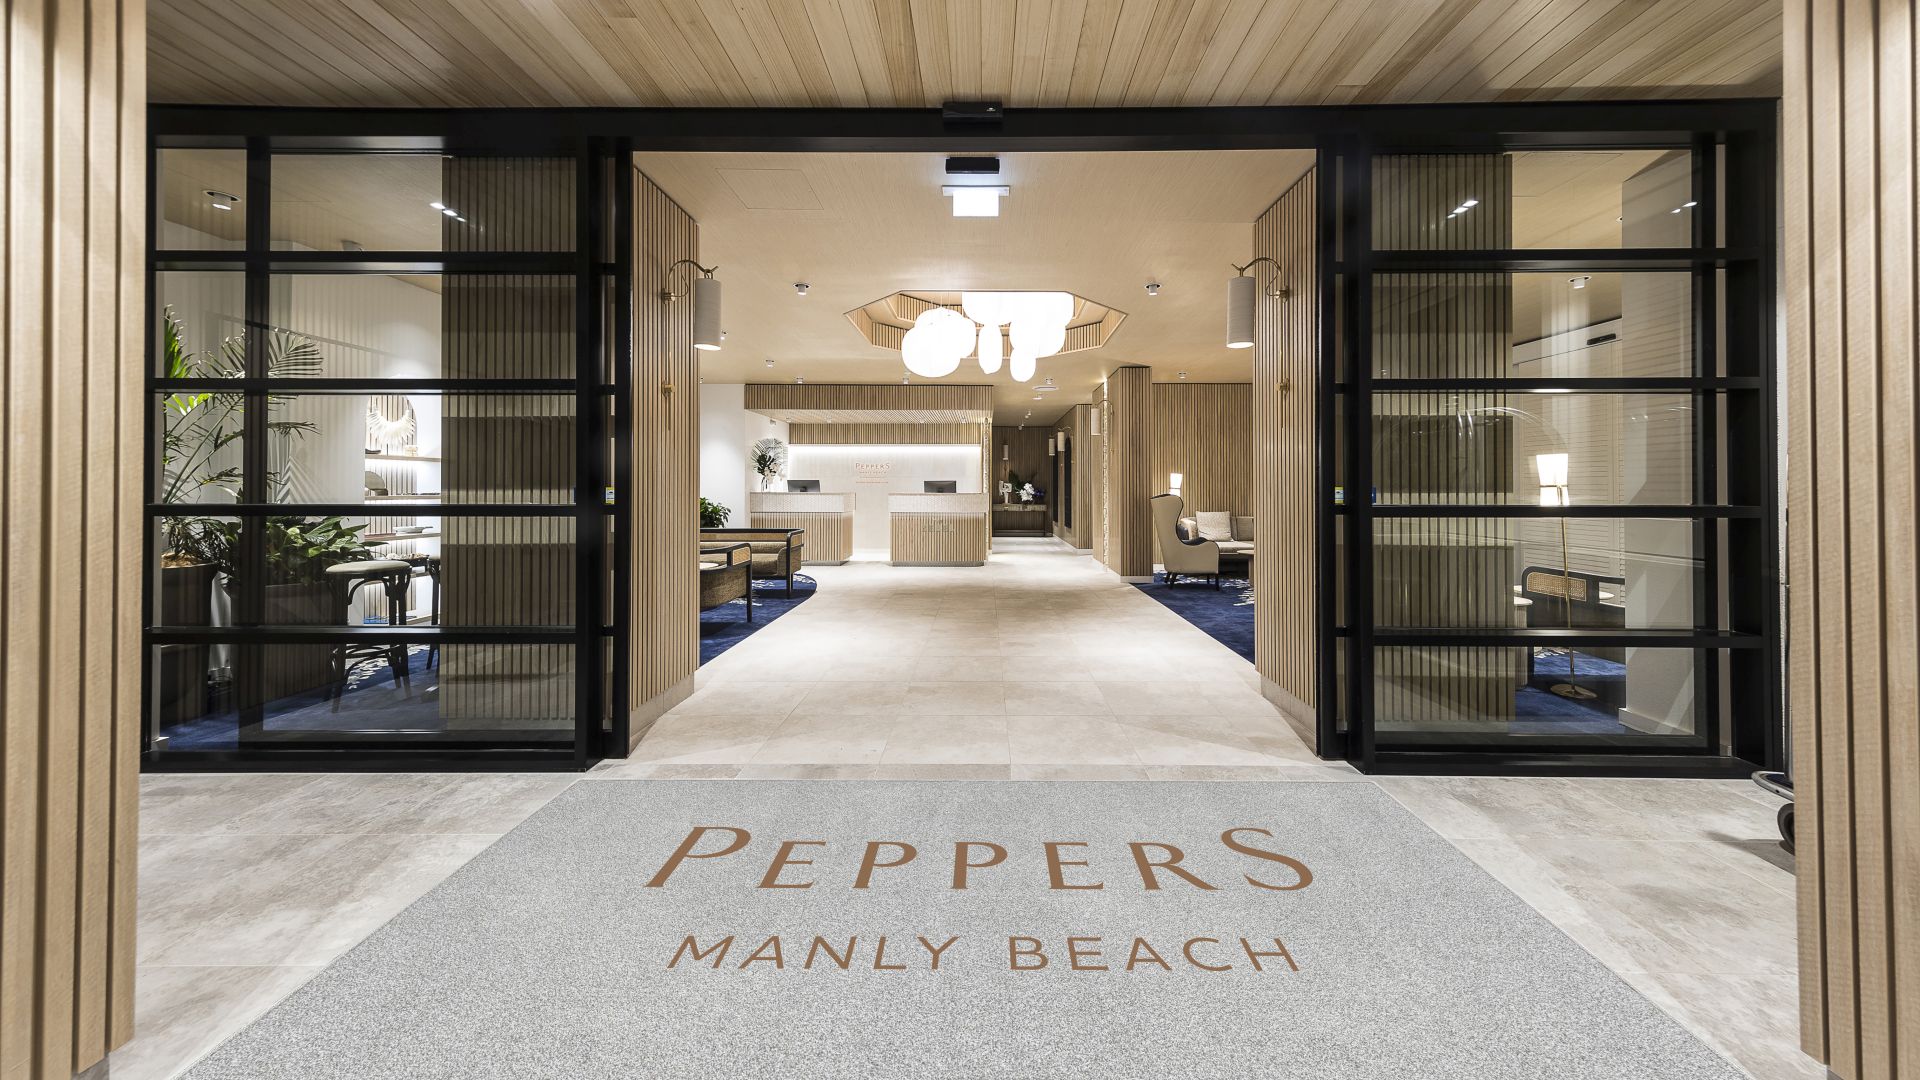 Peppers Manly Beach, Entrance